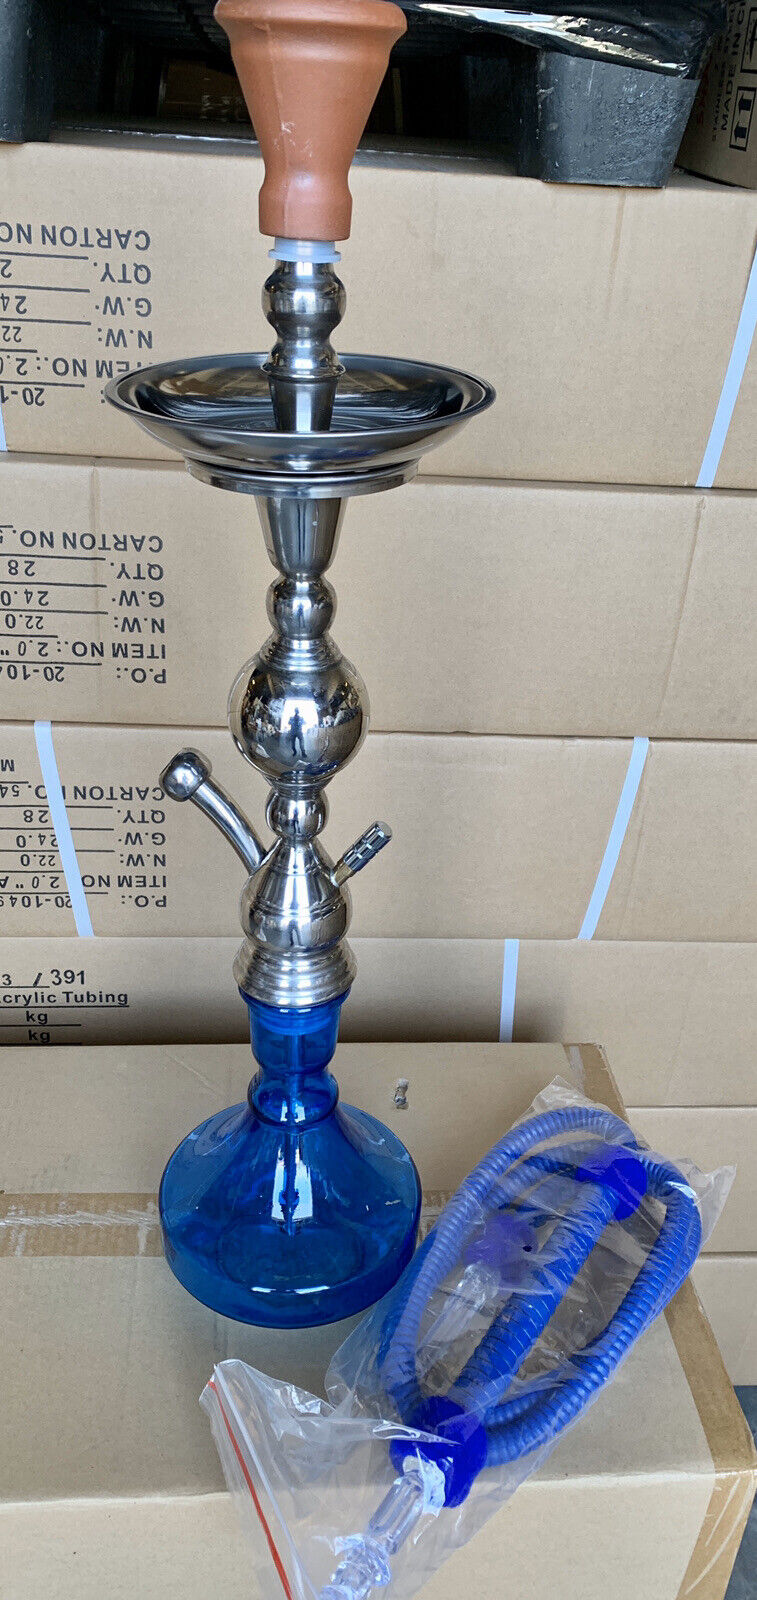 INHALE 36 “  STAINLESS STEEL  EGYPTIAN STYLE HOOKAH WITH A LARGE WASHABLE  HOSE